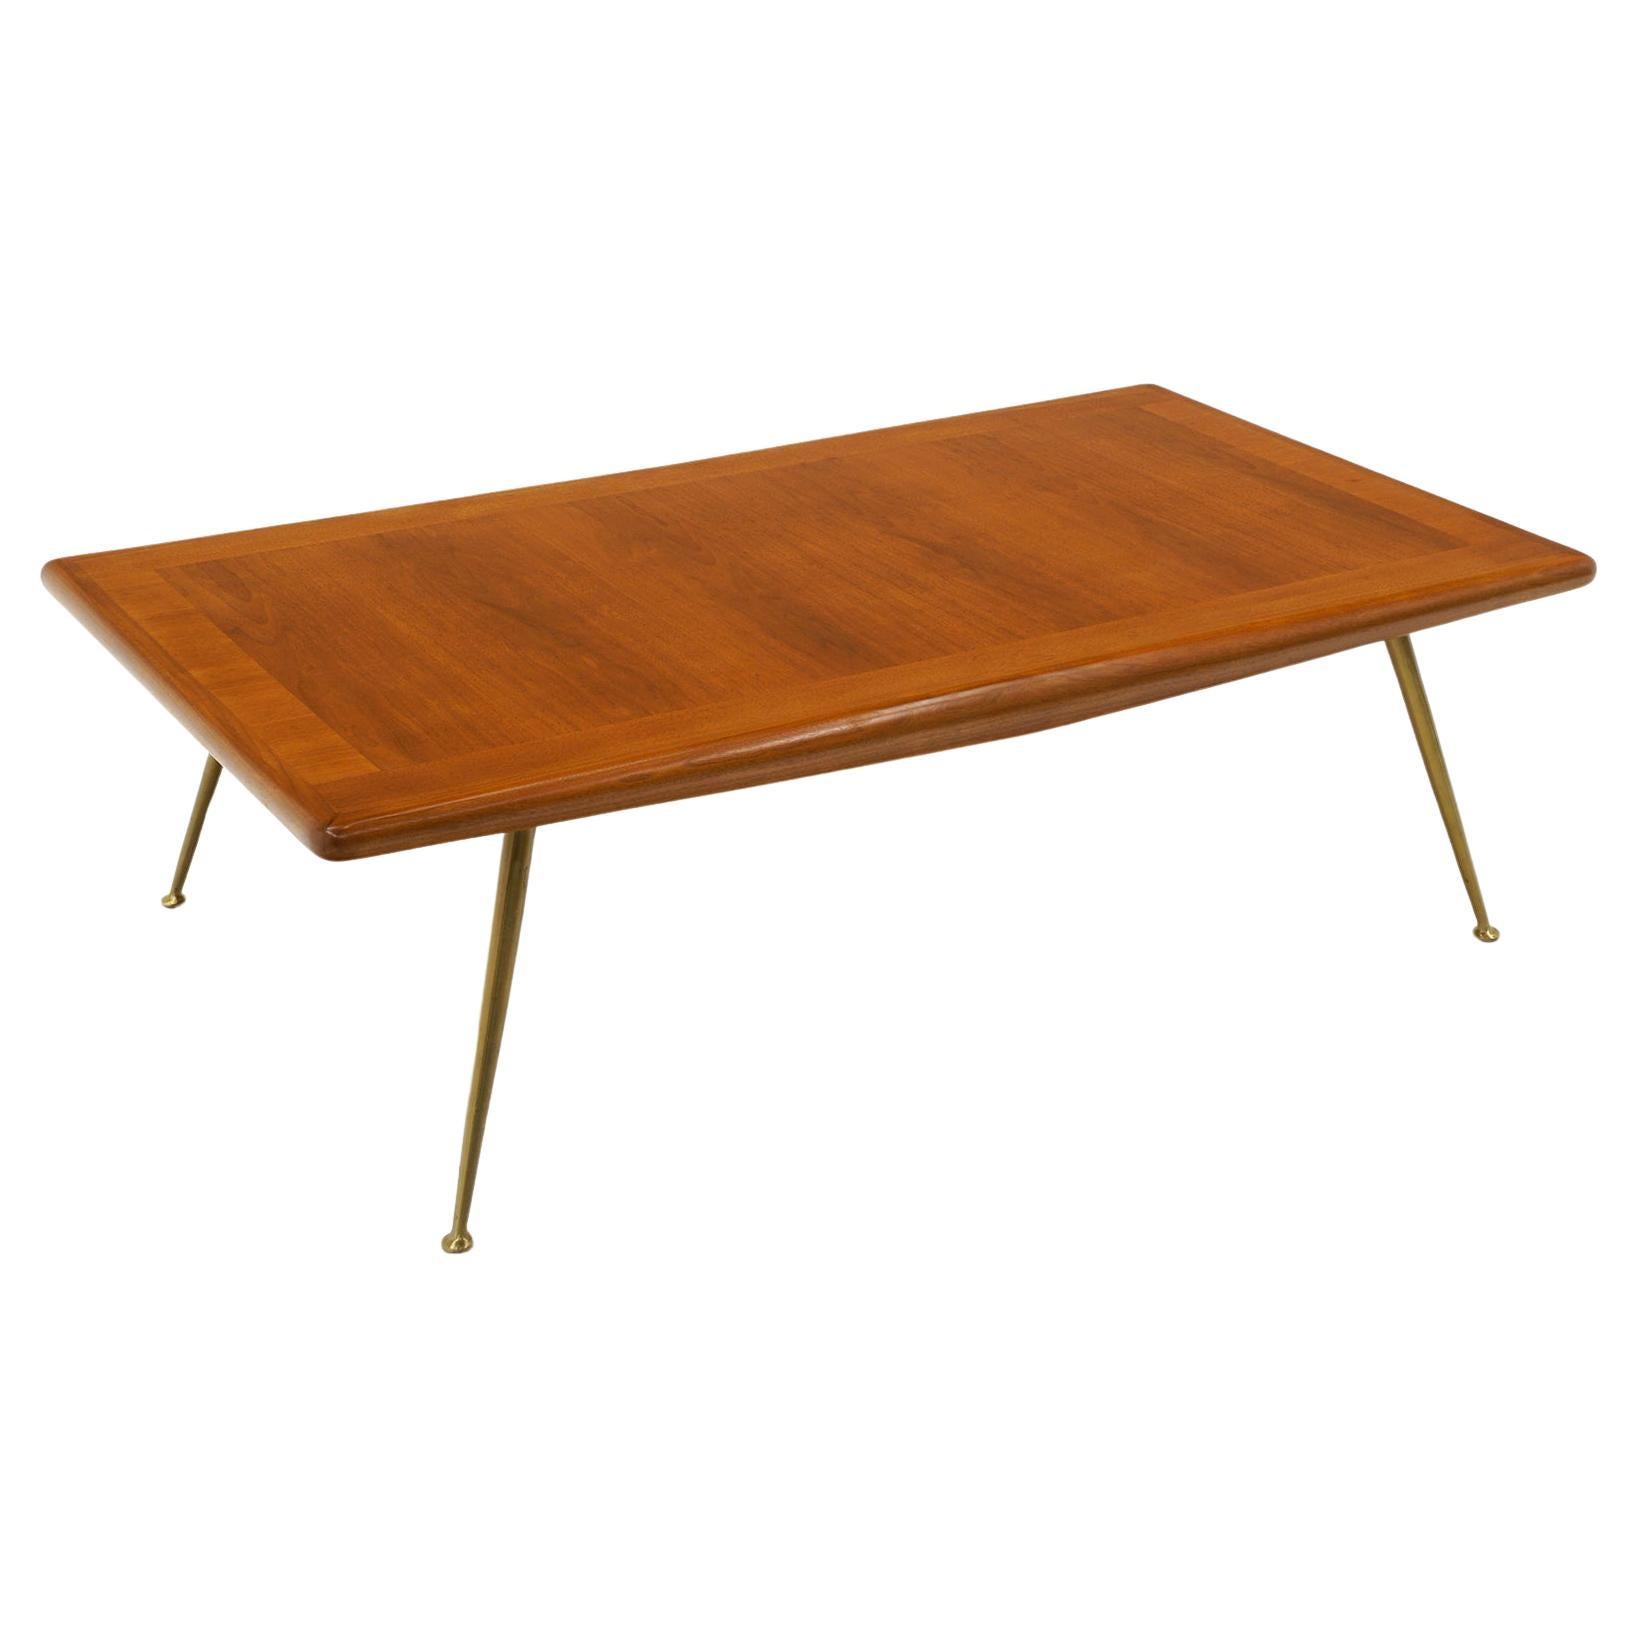 Rare Walnut & Brass Coffee Table by Robsjohn Gibbings for Widdicomb.  Excellent.